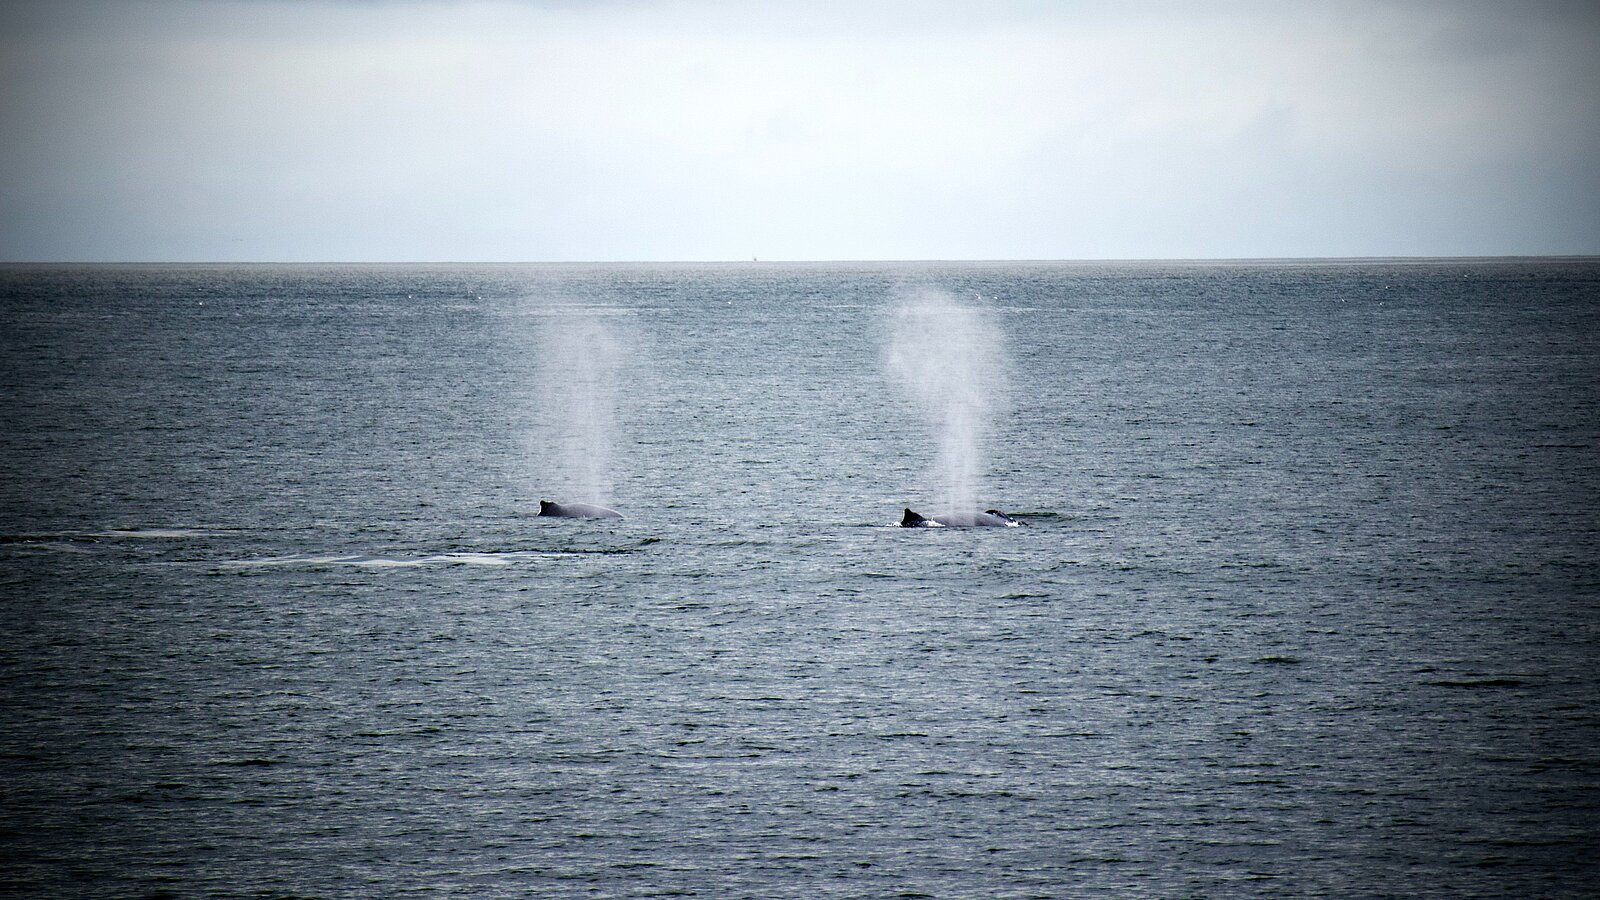 Two whales with blow at the surface